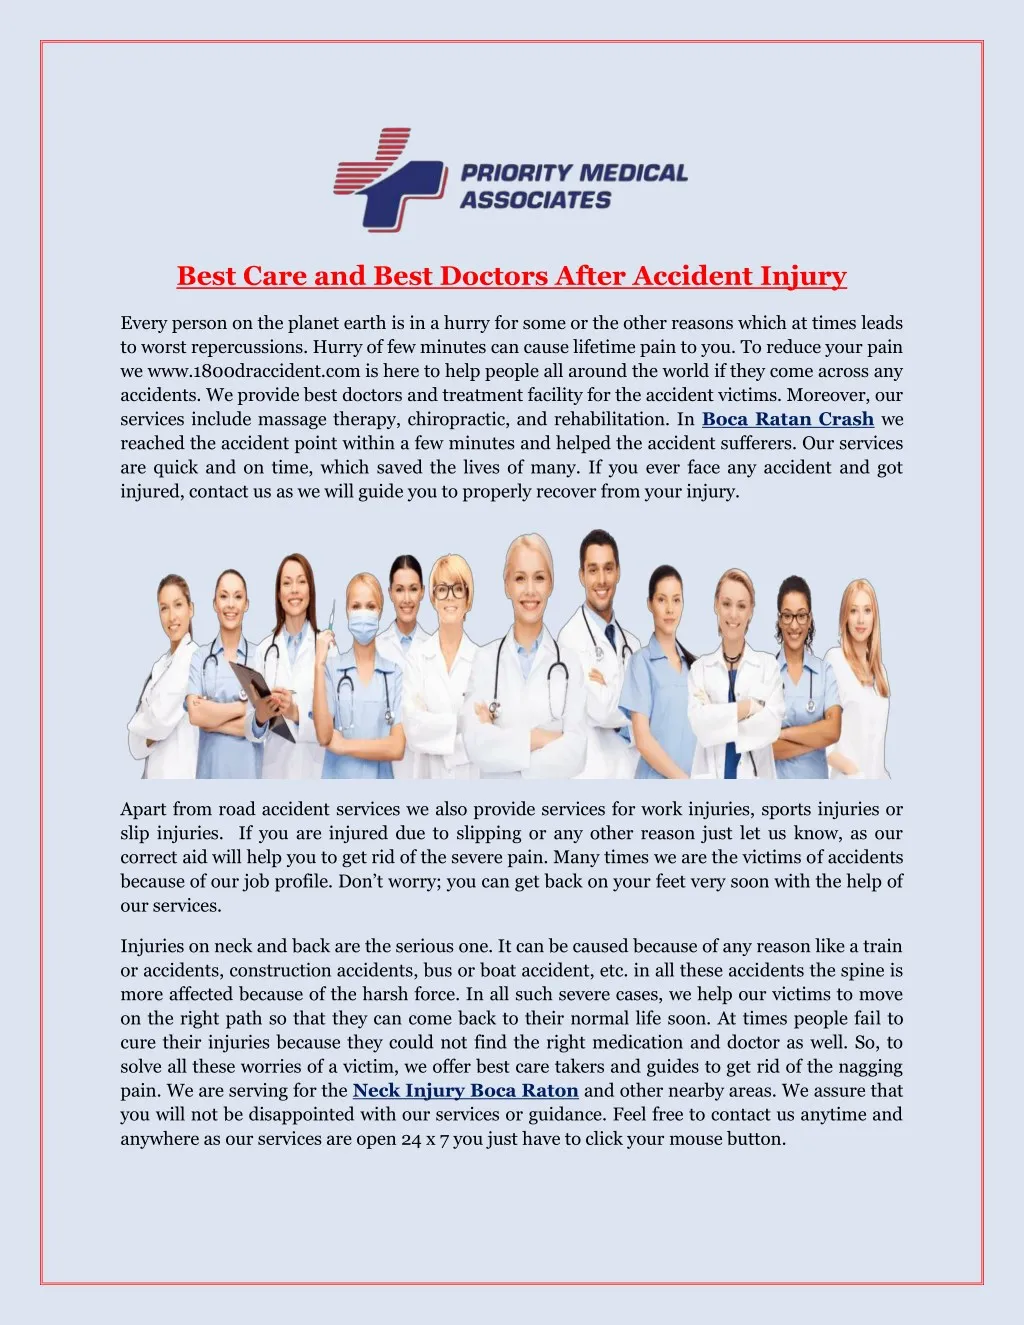 best care and best doctors after accident injury